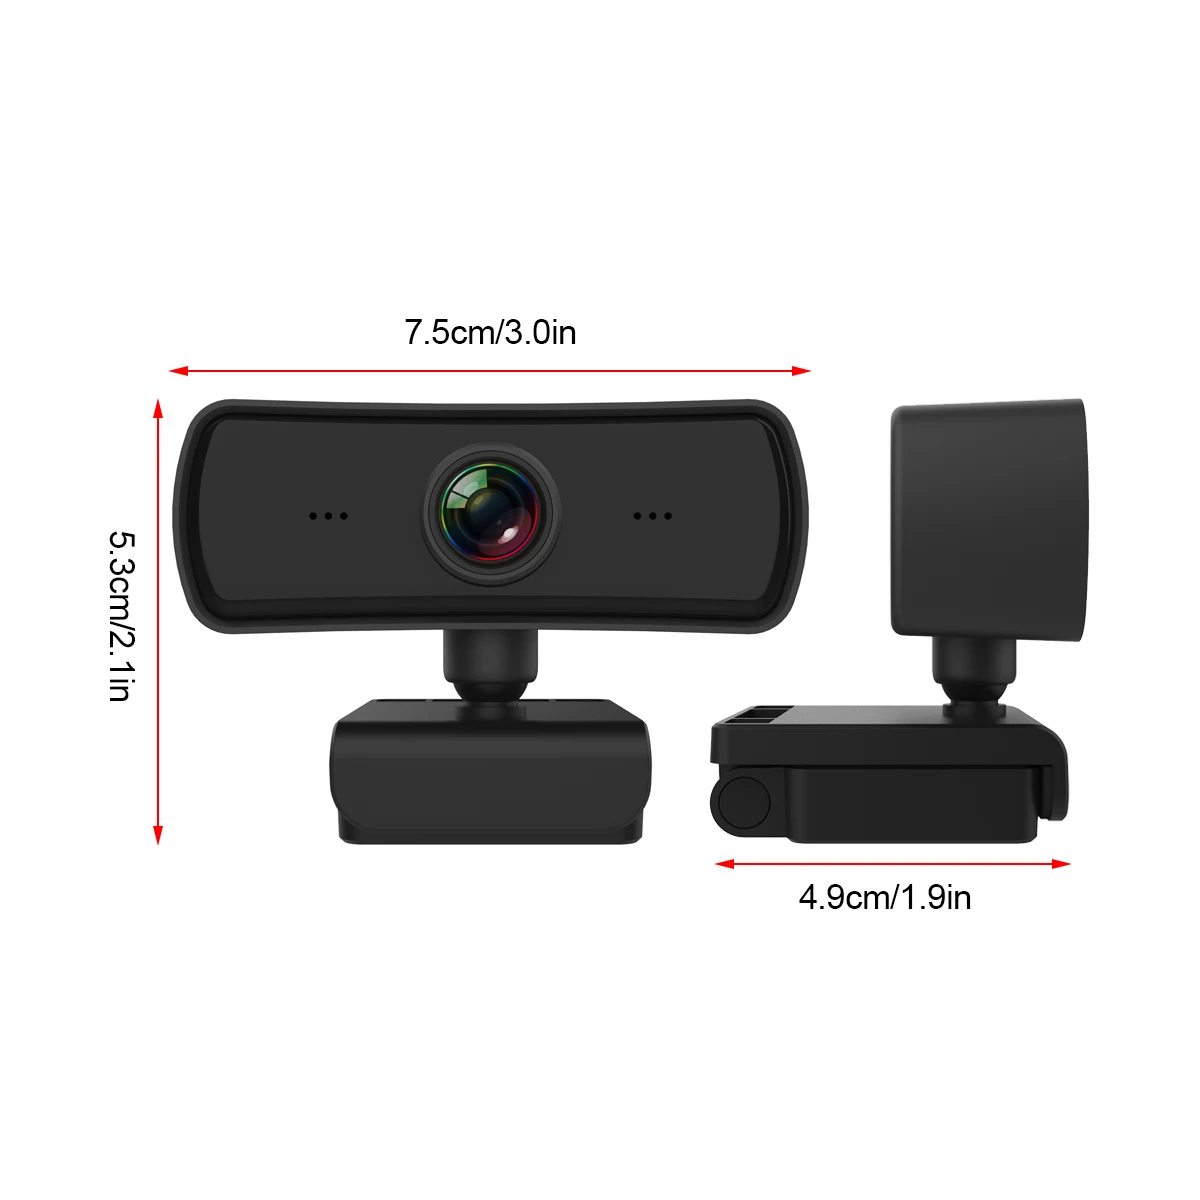 

2K Resolution Auto Focus 360 Rotation H.264 Video Compression1080P HD Computer Camera Video Conference Webcam with Microphone